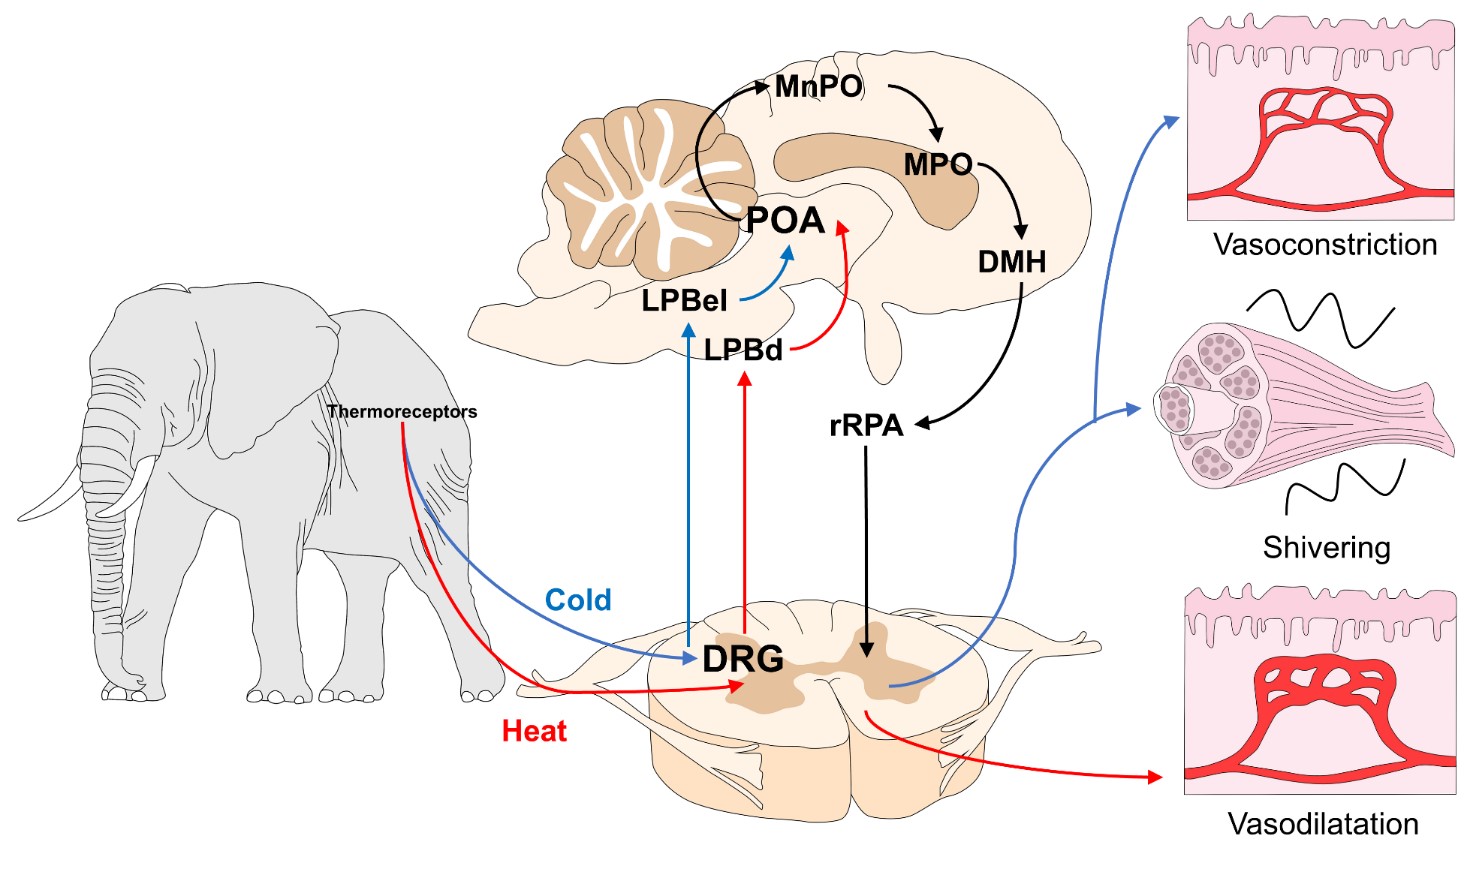 Mechanisms of central and peripheral thermoregulation. The image illustrates the integration of the thermal stimuli detected by the corpuscles of Ruffini or Krause in the face of heat or cold, respectively. Although the central pathways in both cases are very similar and use the DRG, POA, MnPO, or rRPA (black lines), the main difference is observed in the LPBN regions that are activated by stimuli of a different nature. The red lines show the thermoregulatory mechanisms in warm environments, where LPBd neurons produce vasodilation. In contrast, with cold stimuli (blue lines), the LPBel neurons are stimulated to generate sympathetic vasoconstriction and stimulate motor fibers that promote shivering and non-shivering thermogenesis. DRG: dorsal root ganglia; LPBd: dorsal part of the lateral parabrachial nucleus; LPBeL: Lateral parabrachial nucleus in its external region; POA: preoptic area of the hypothalamus; MnPO: median preoptic nucleus; MPO: medial preoptic area; DMH: dorsomedial hypothalamus; rRPA: rostral raphe pallidus.